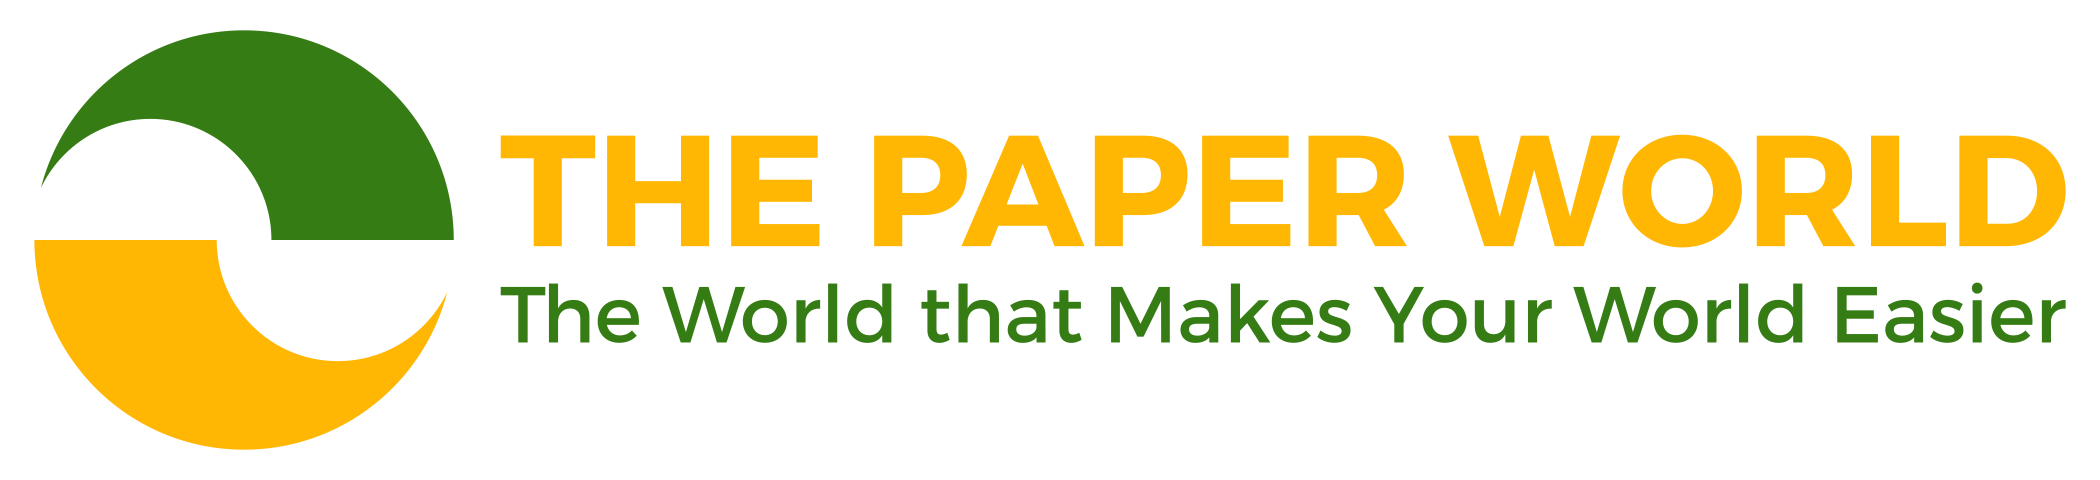 The Paper World